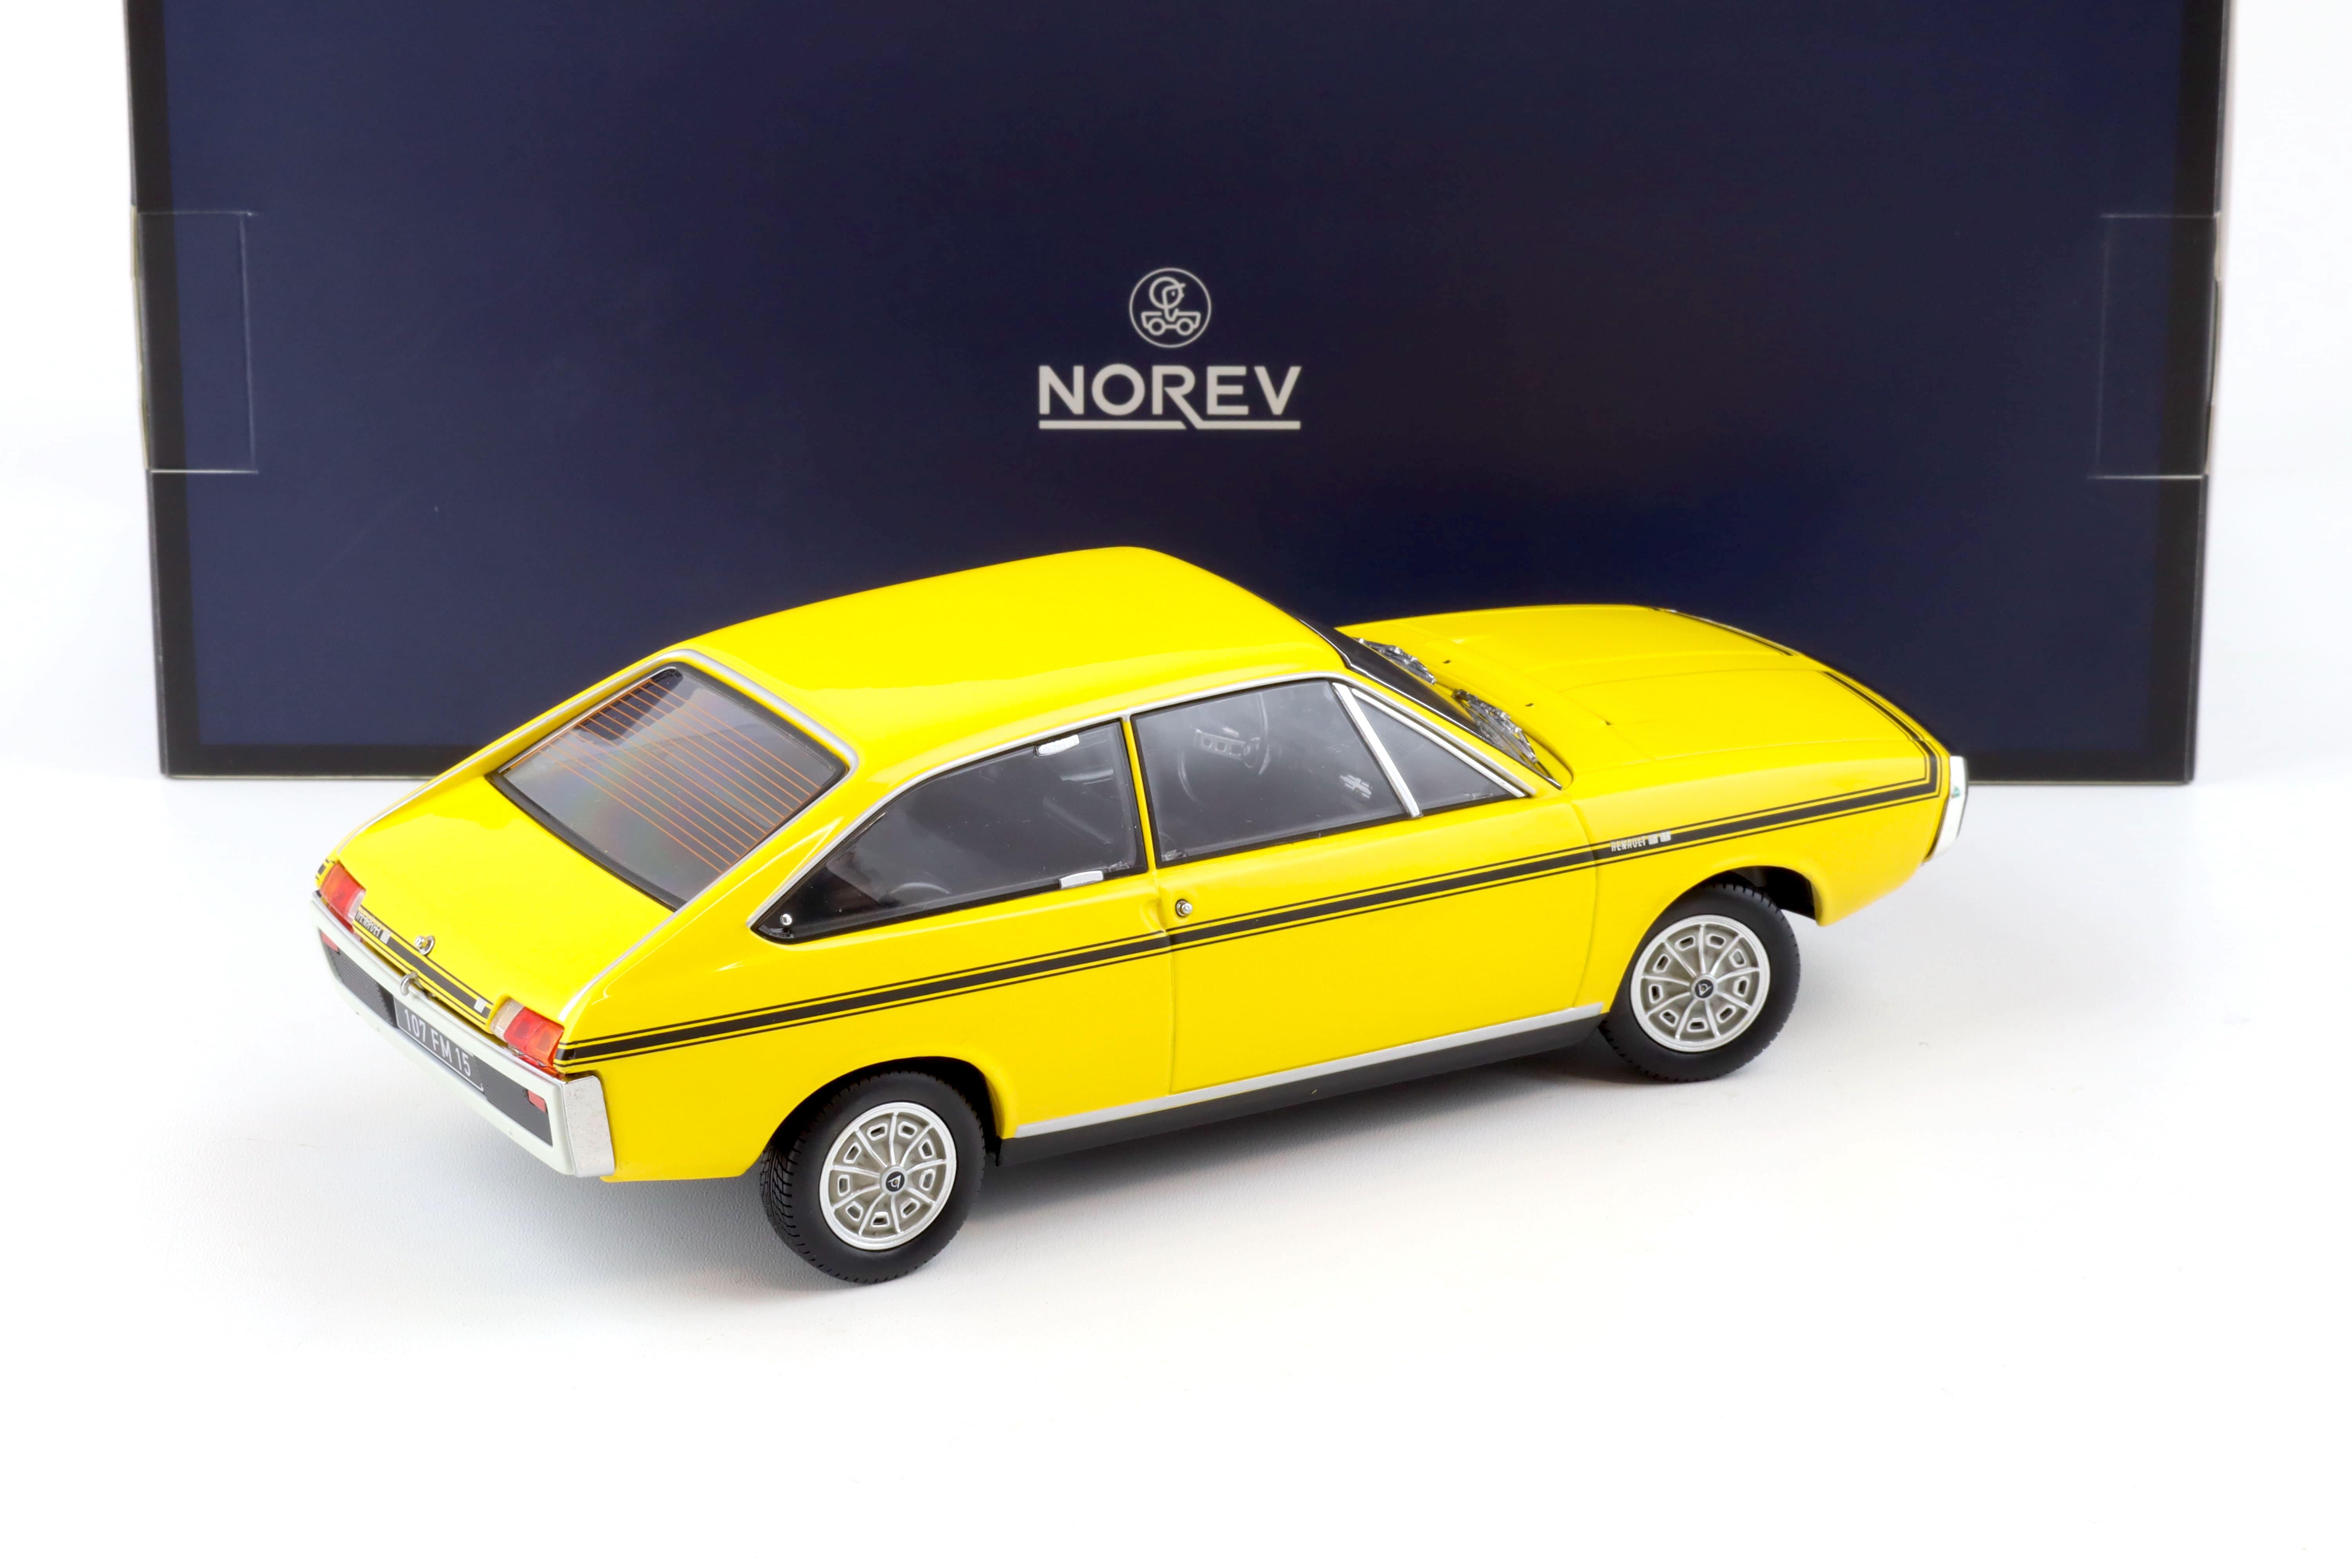 1:18 Norev Renault 15 TL 1973 yellow with black deco - Limited 300 pcs.